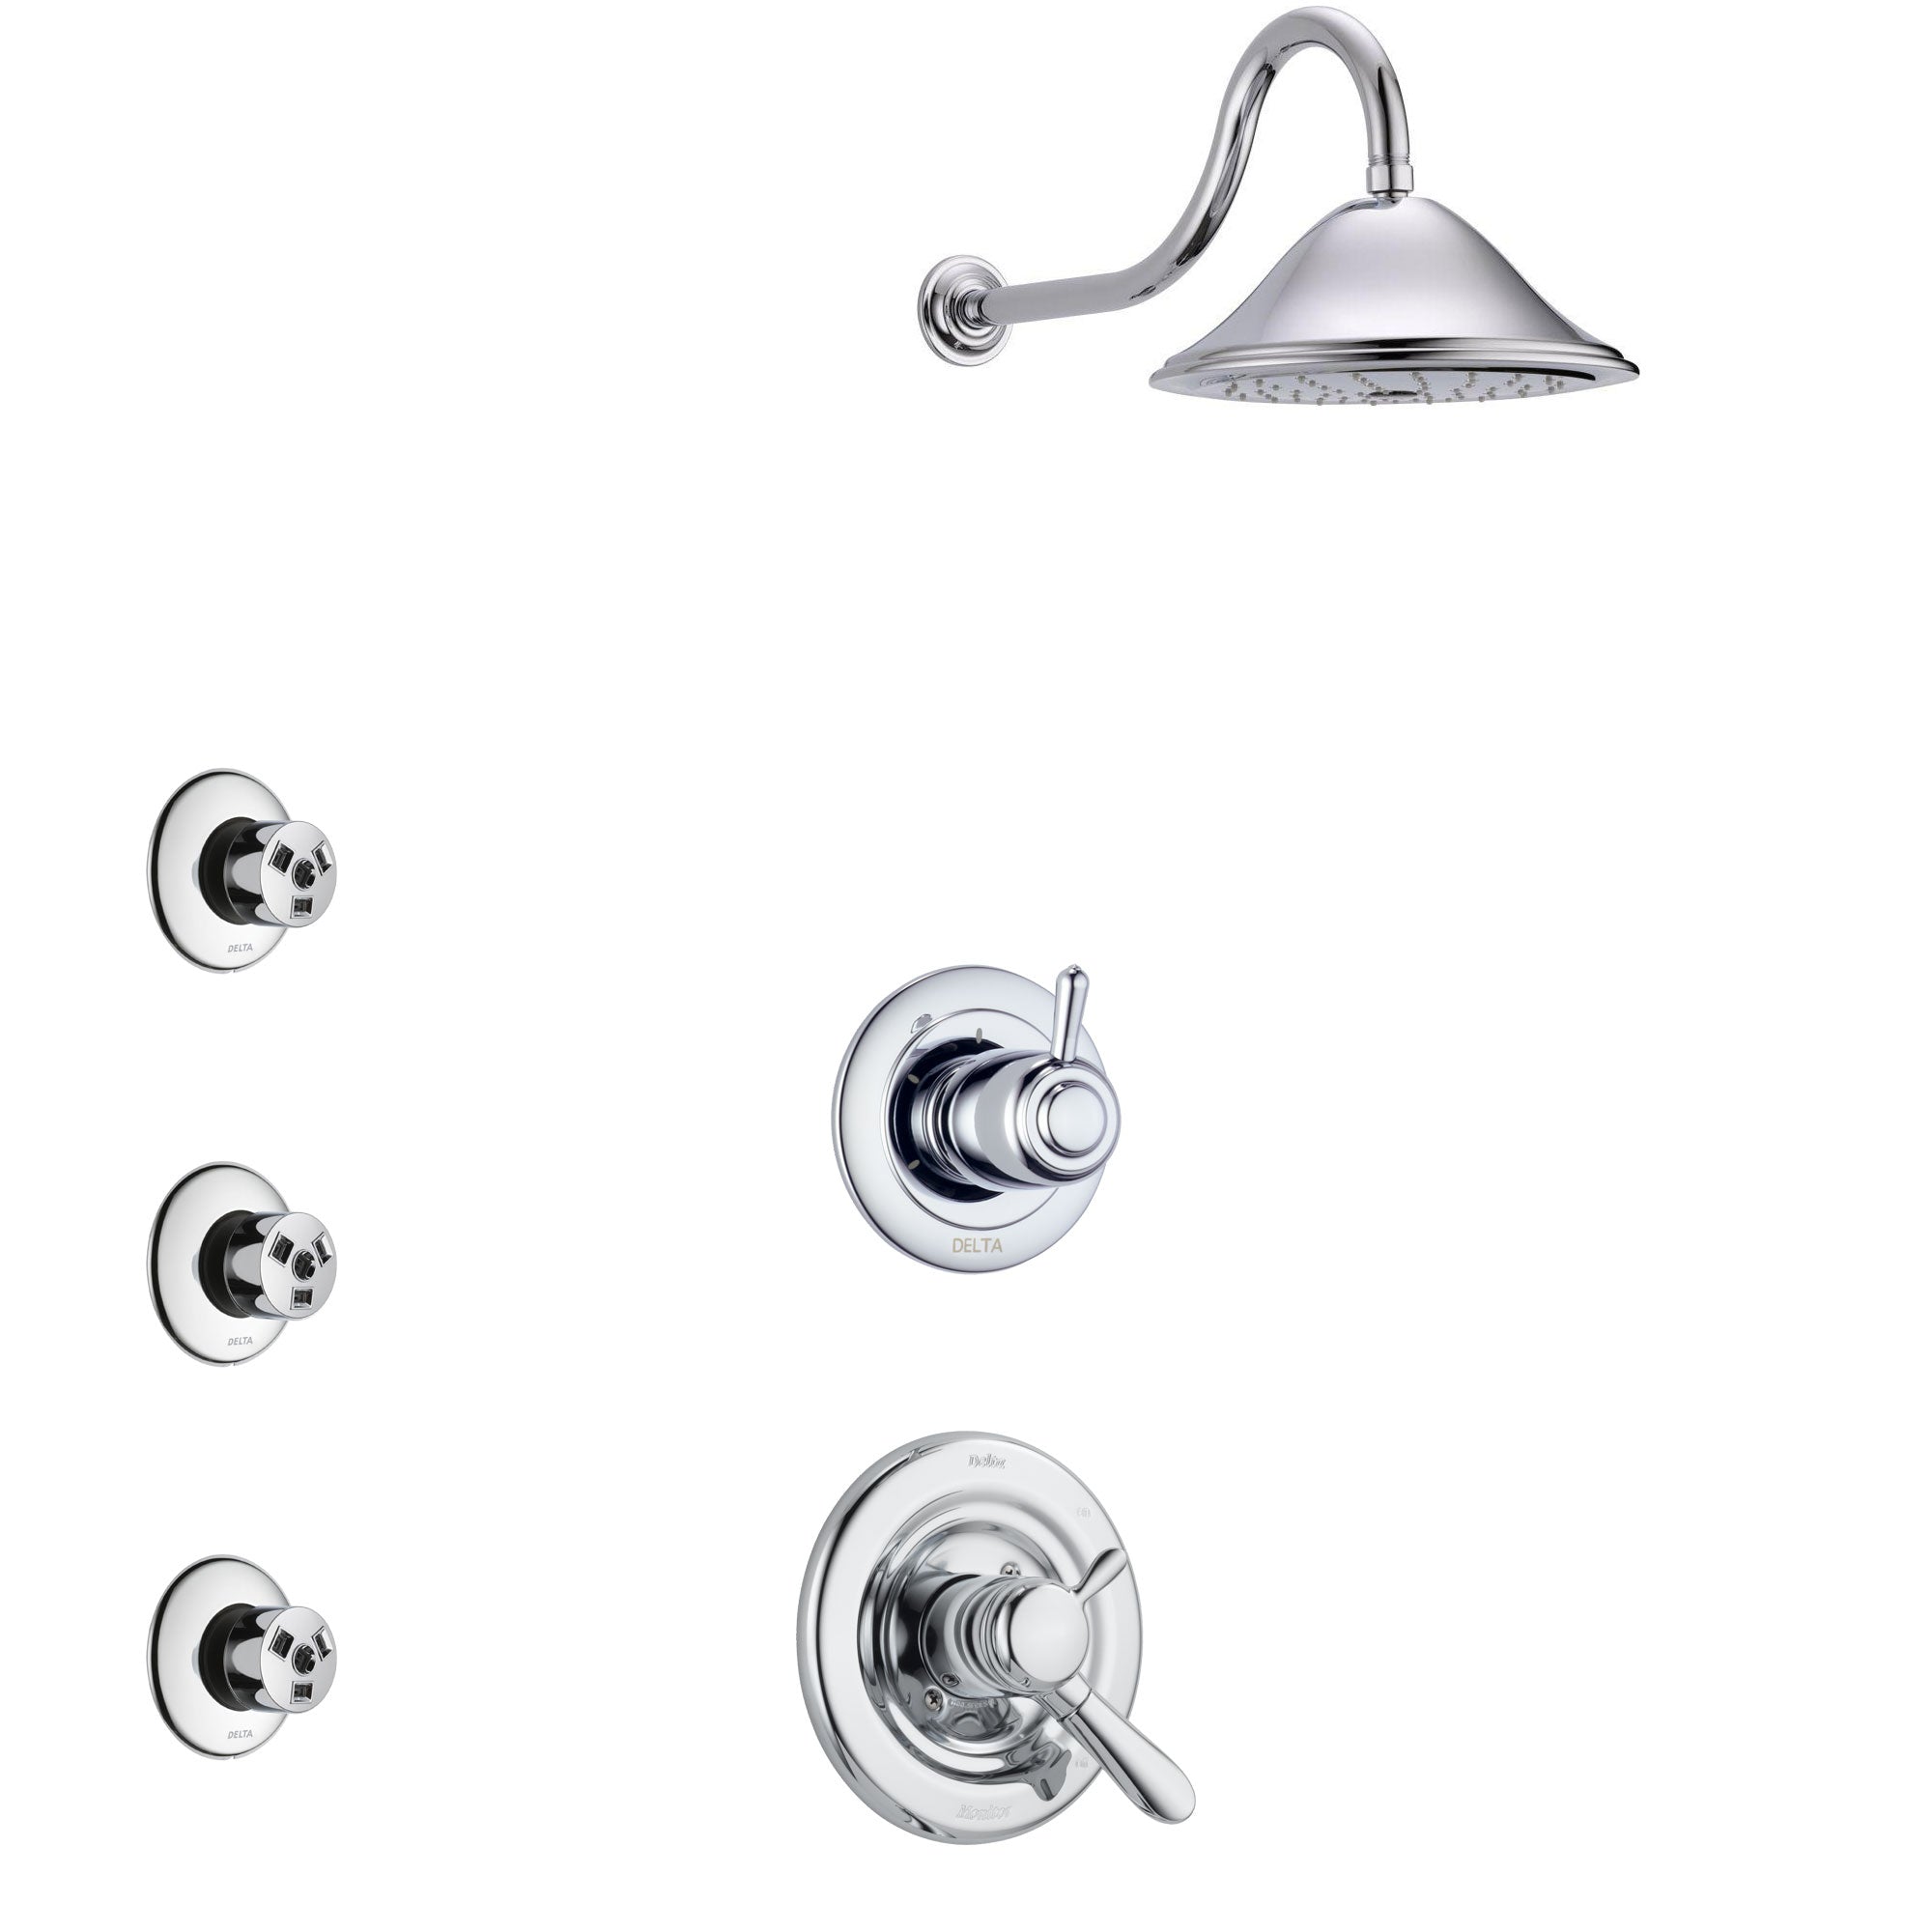 Delta Lahara Chrome Finish Shower System with Dual Control Handle, 3-Setting Diverter, Showerhead, and 3 Body Sprays SS17388